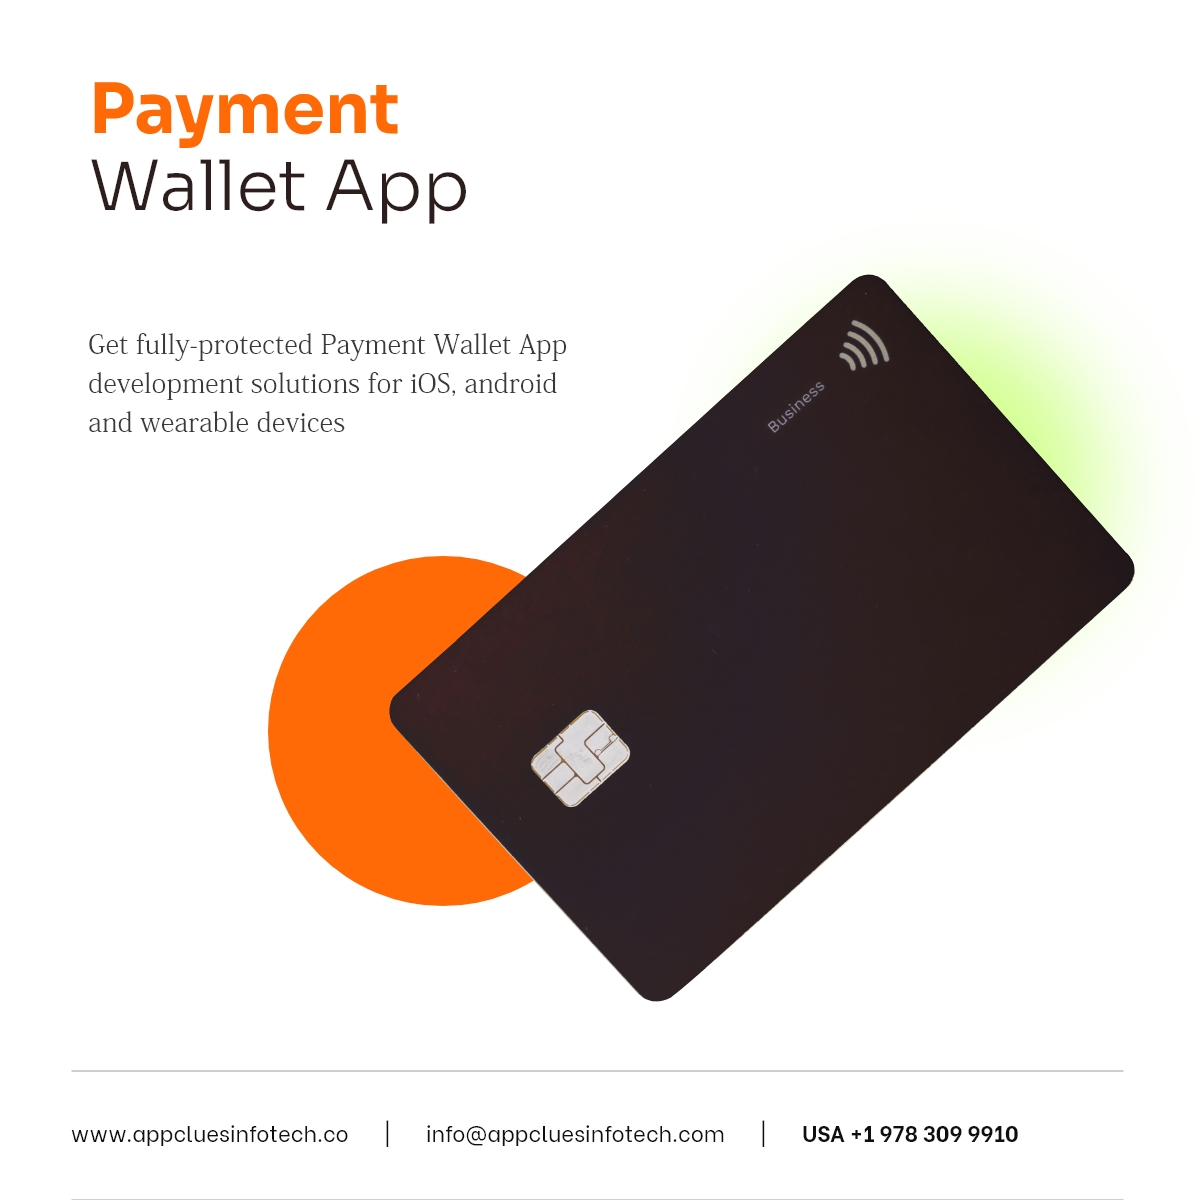 How to Make a Payment Wallet App?